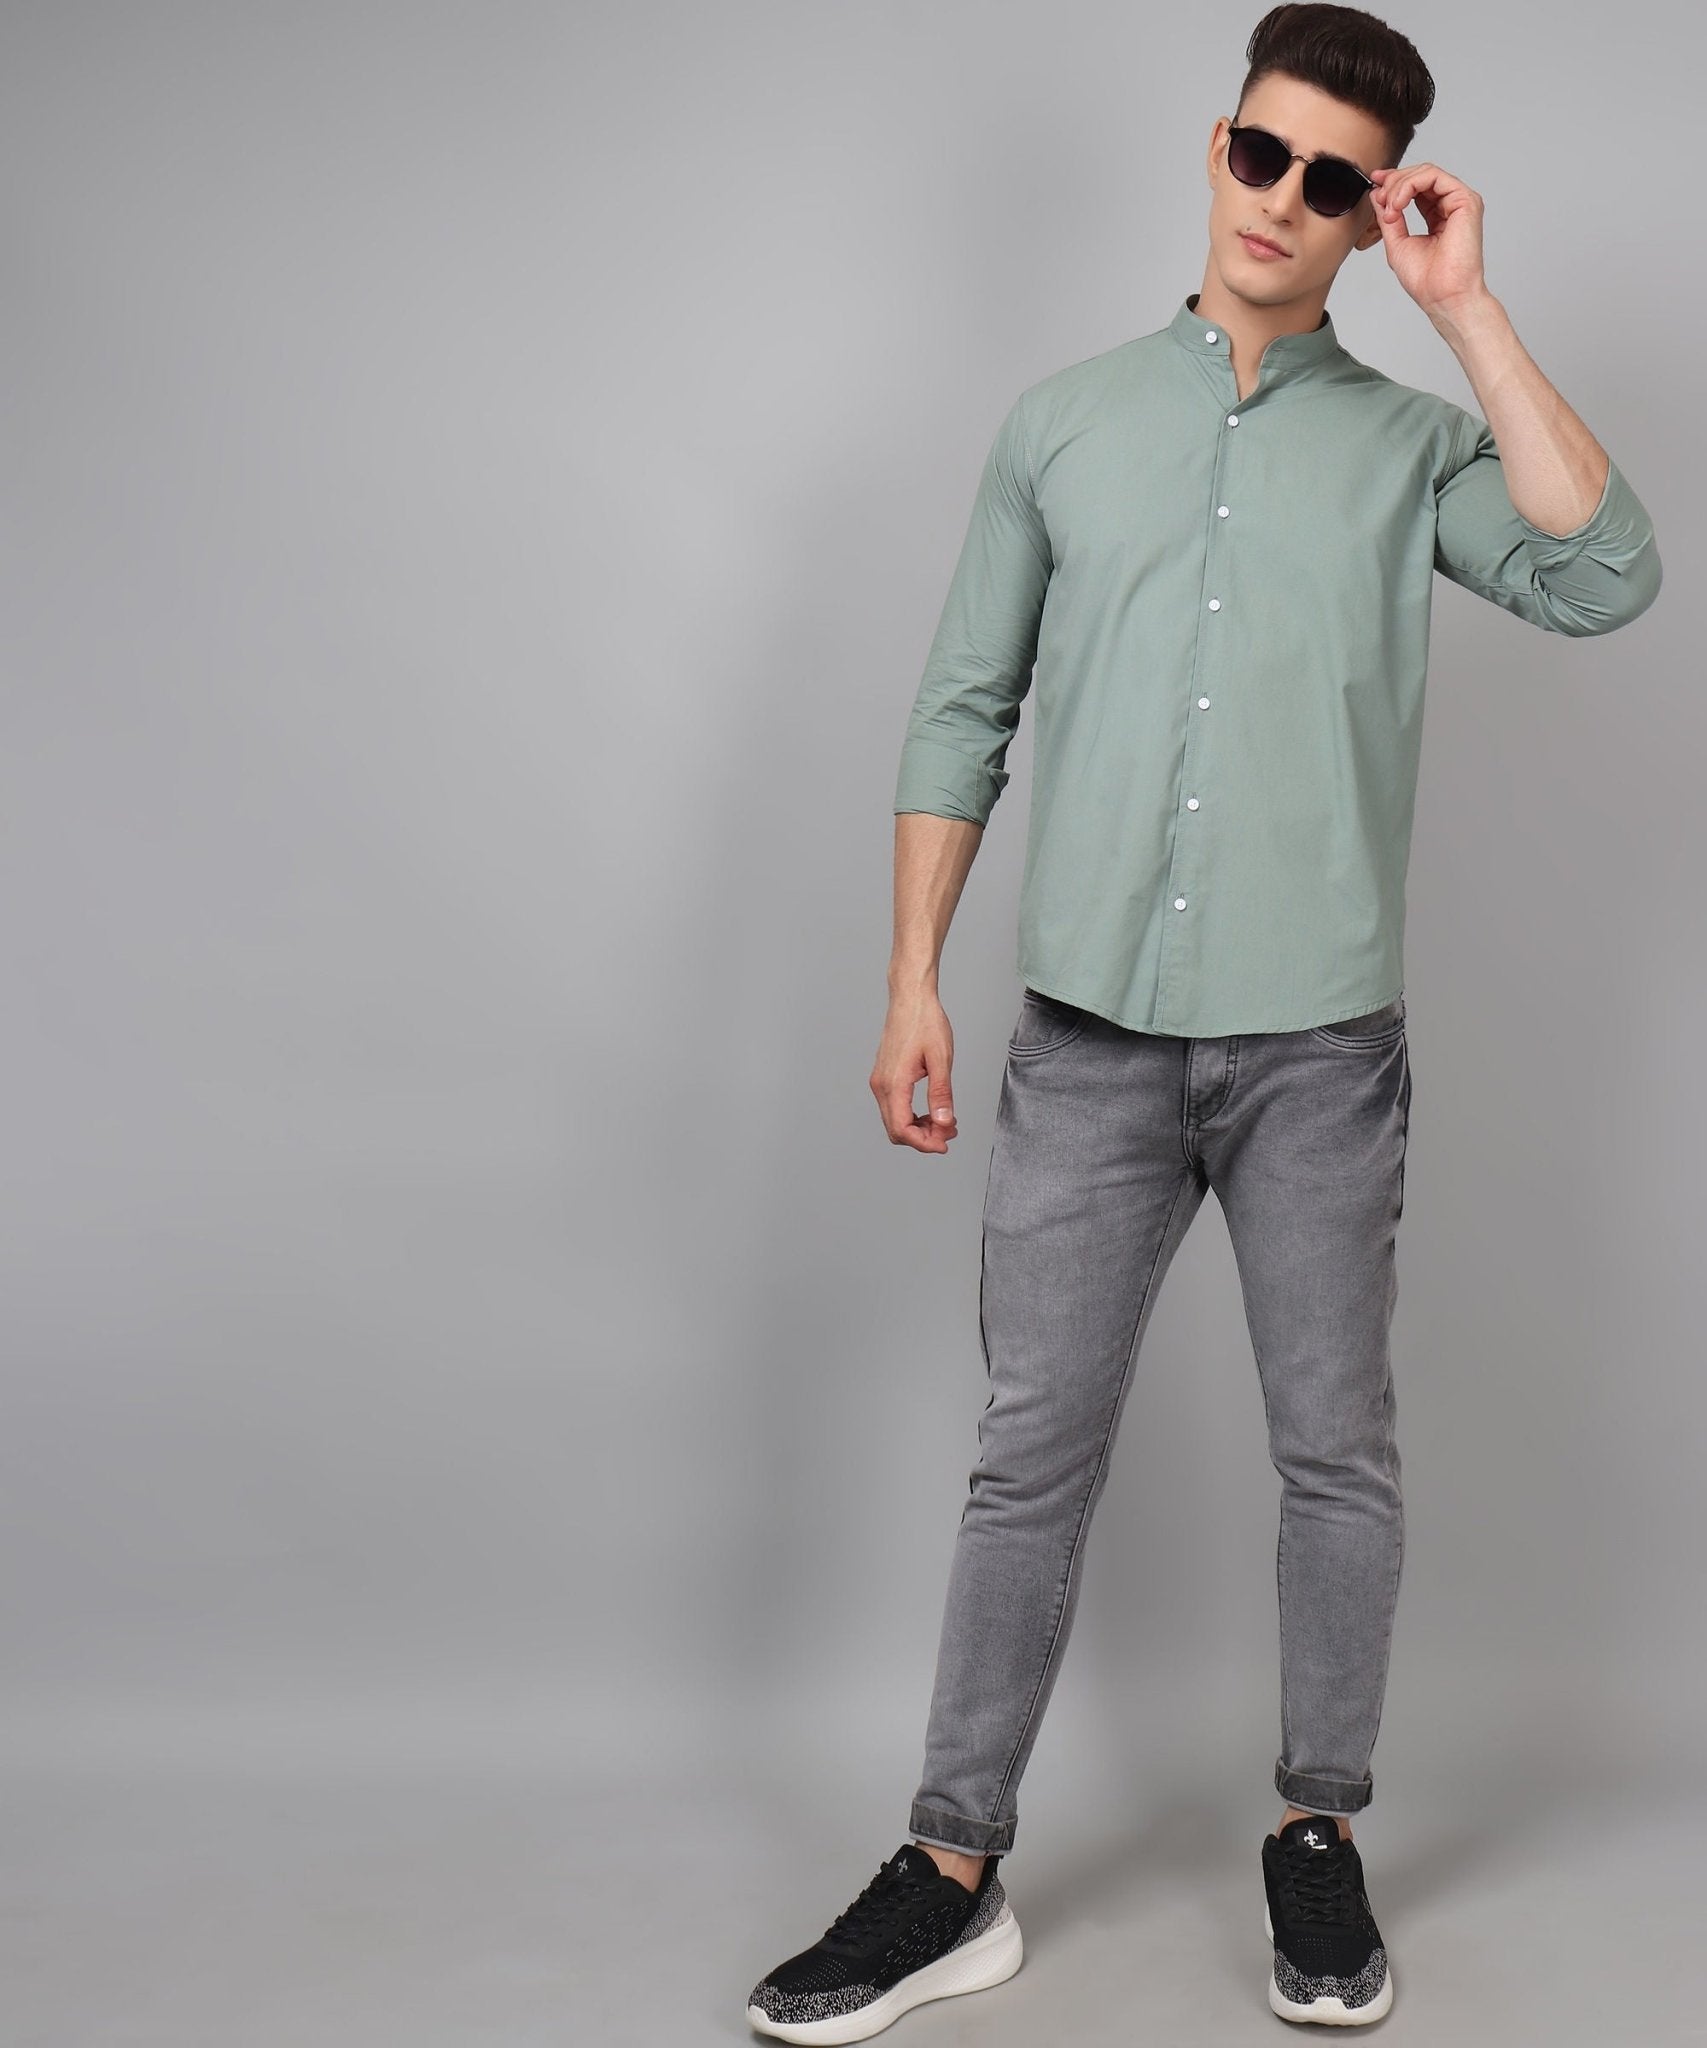 Trybuy Premium Fashionable Cotton Casual Solid Ocean Green Shirt for Men - TryBuy® USA🇺🇸